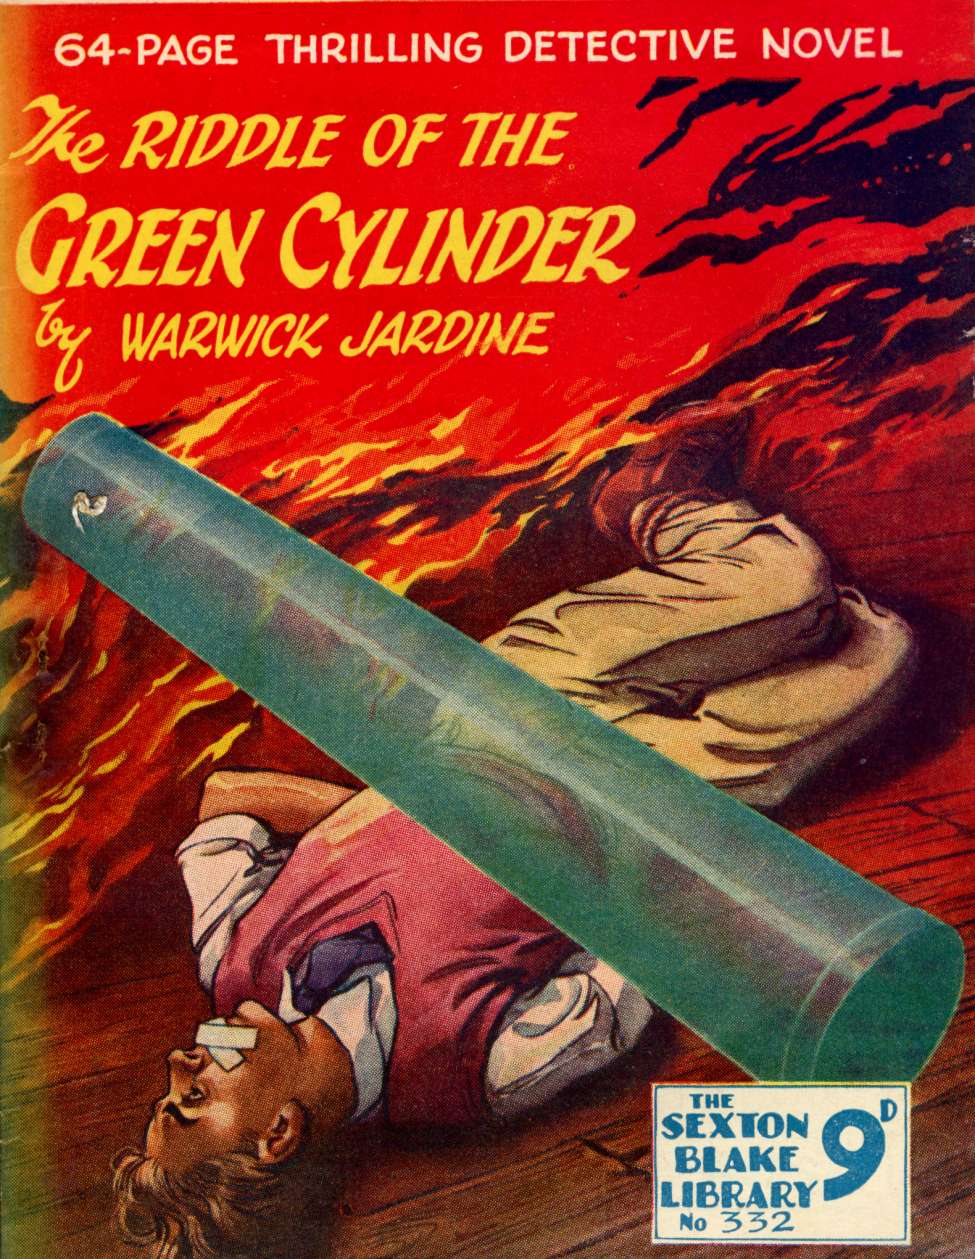 Book Cover For Sexton Blake Library S3 332 - The Riddle of the Green Cylinder